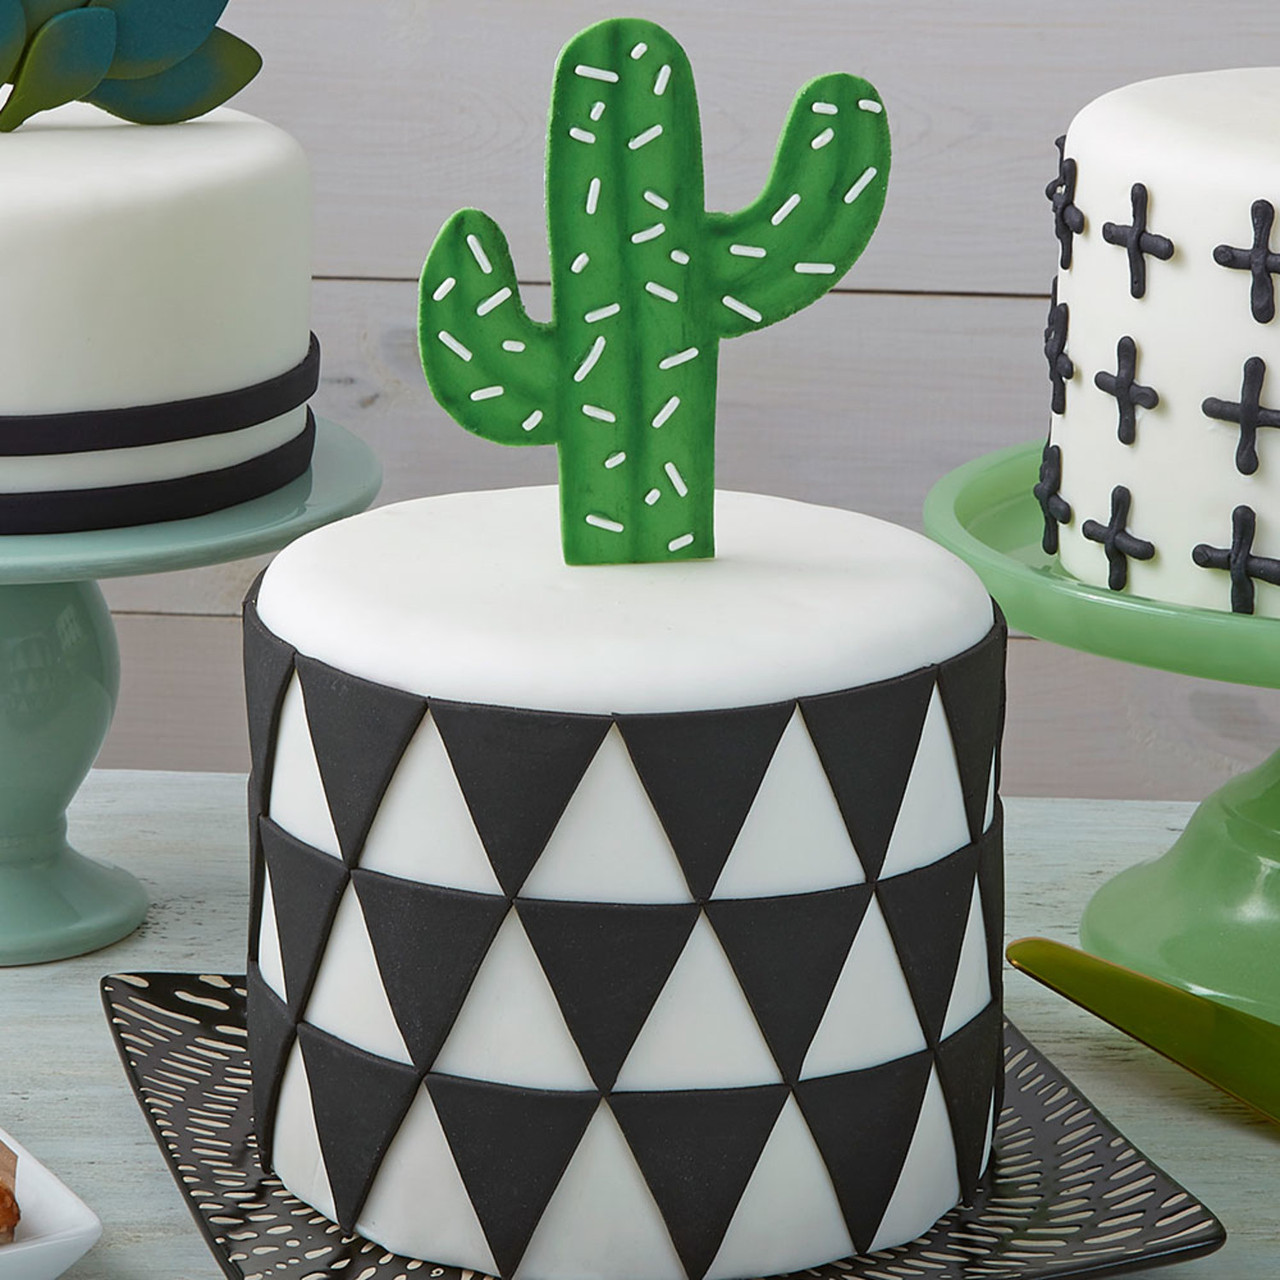 Dazzling and Delicious: How to Add Sparkle to Your Cake